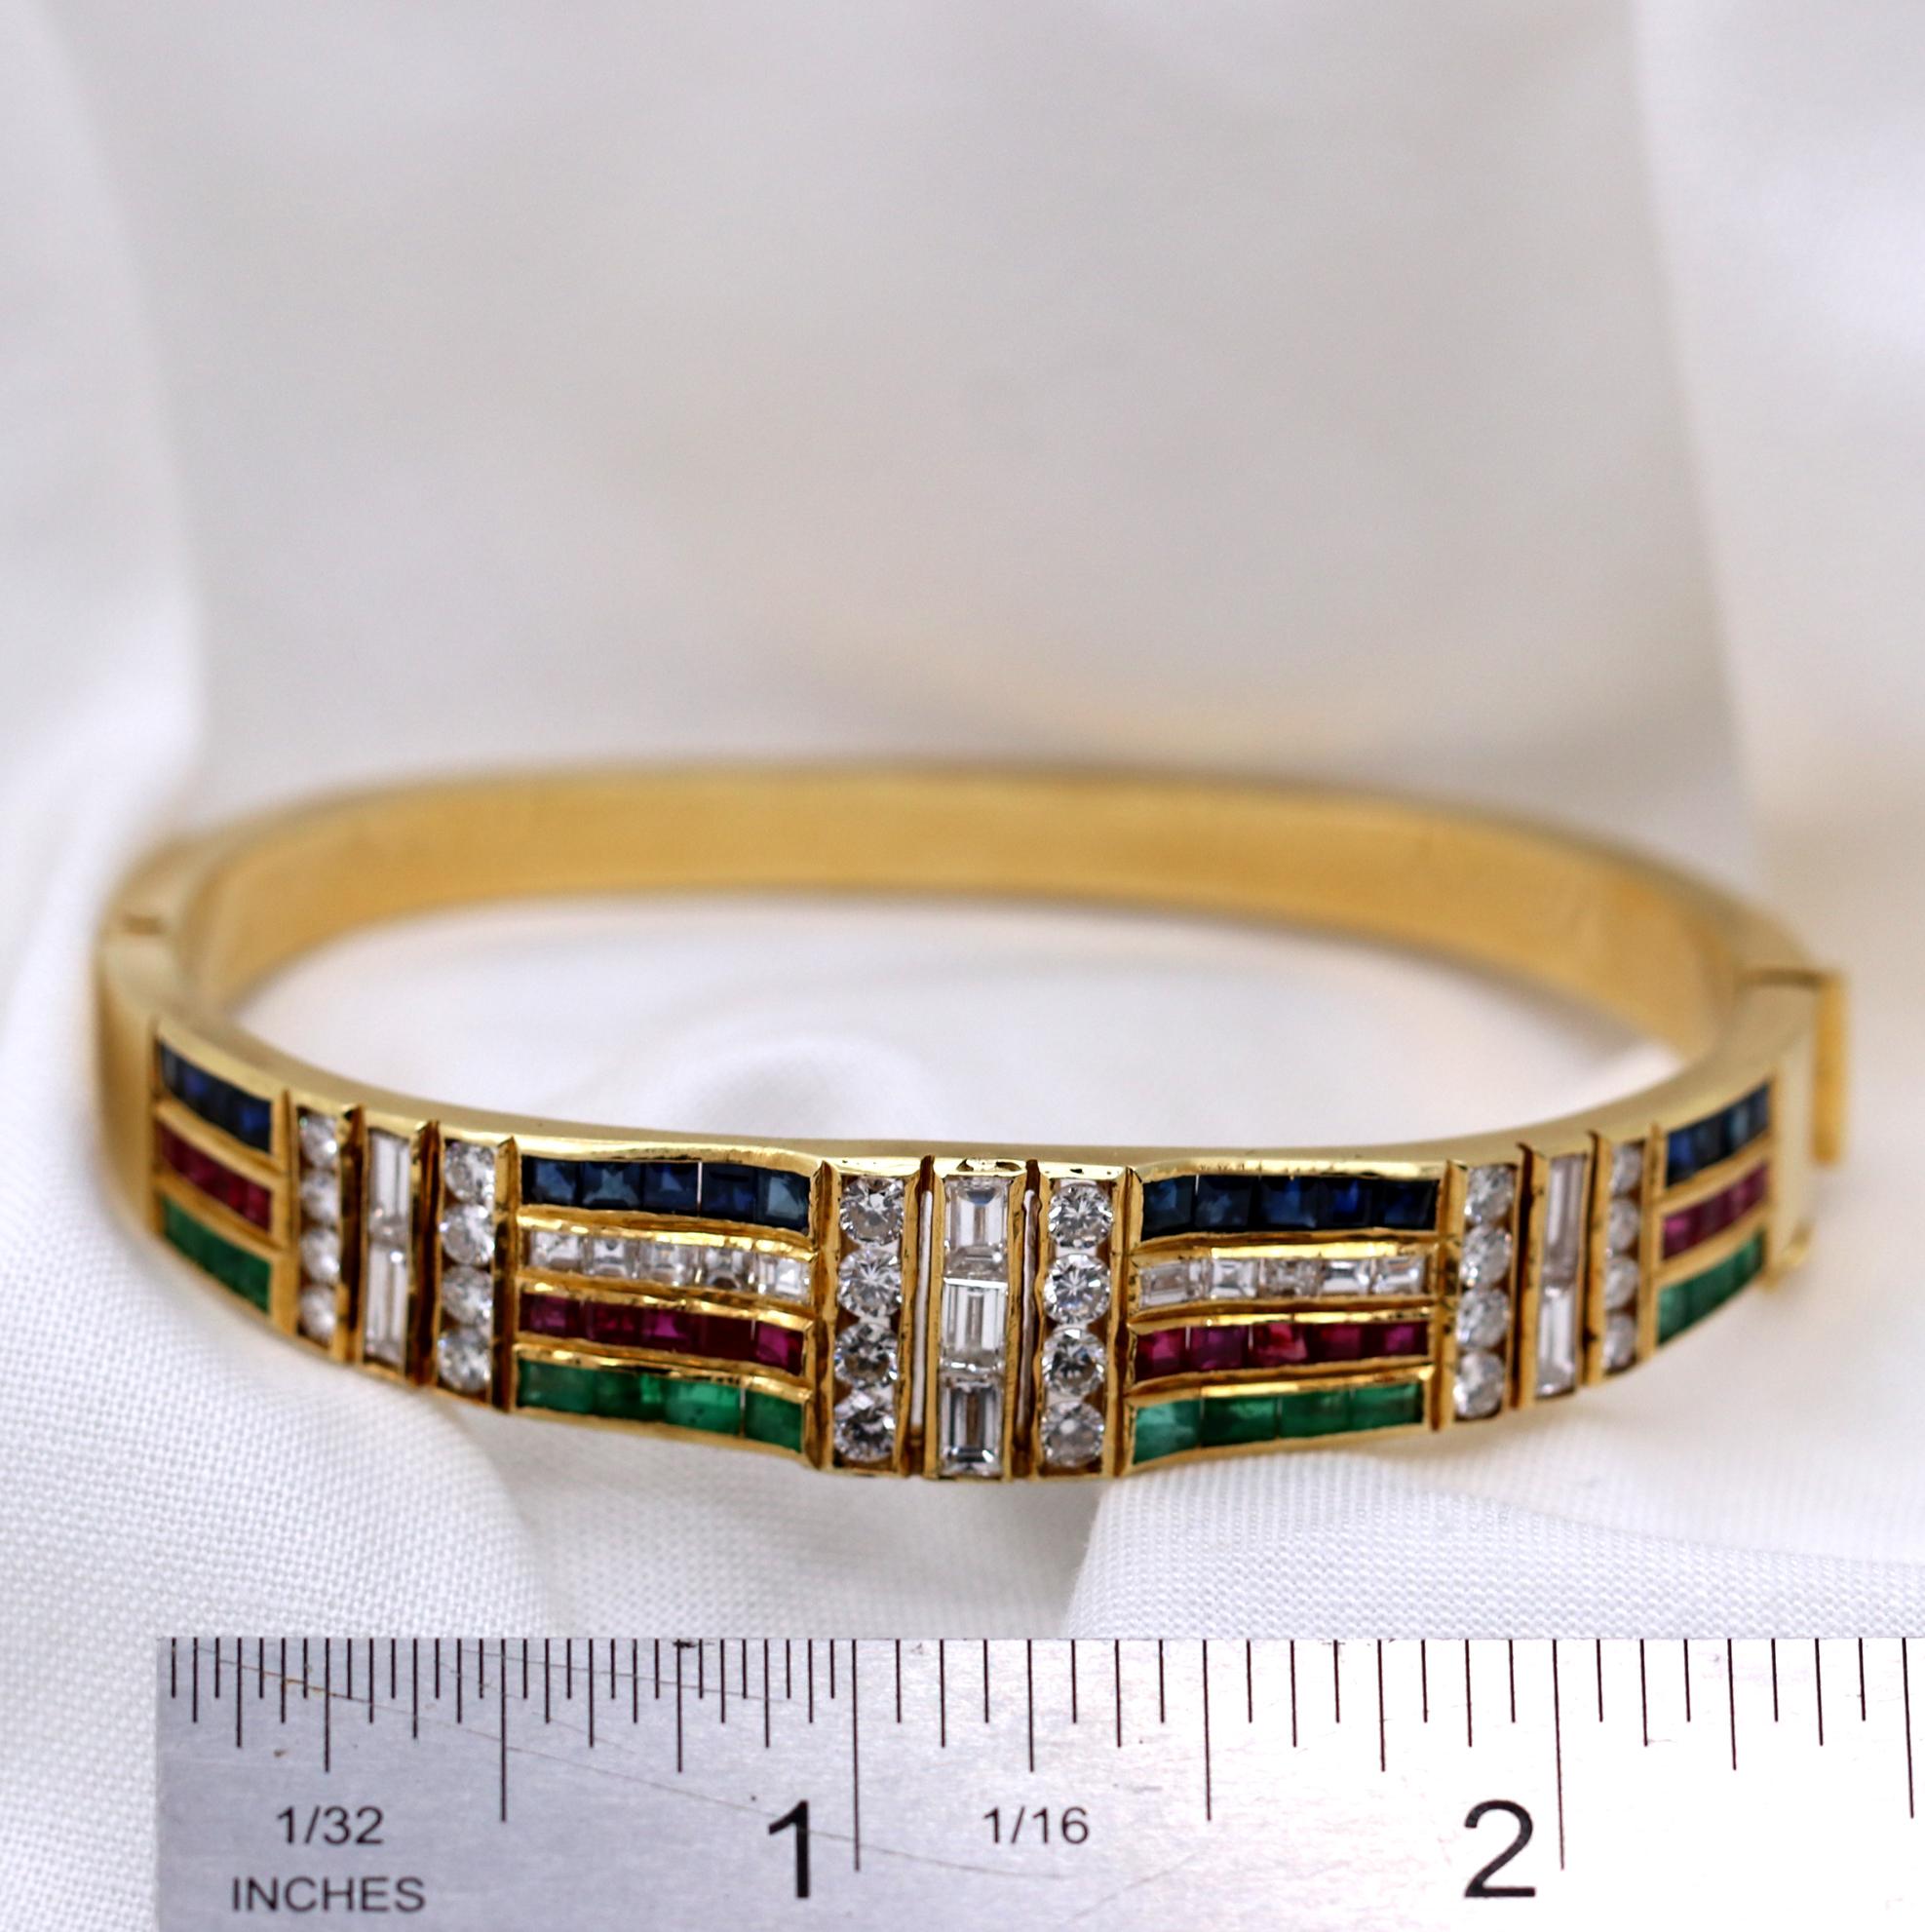 Bangle Bracelet with a Rainbow of Colored Stones and Diamonds 6